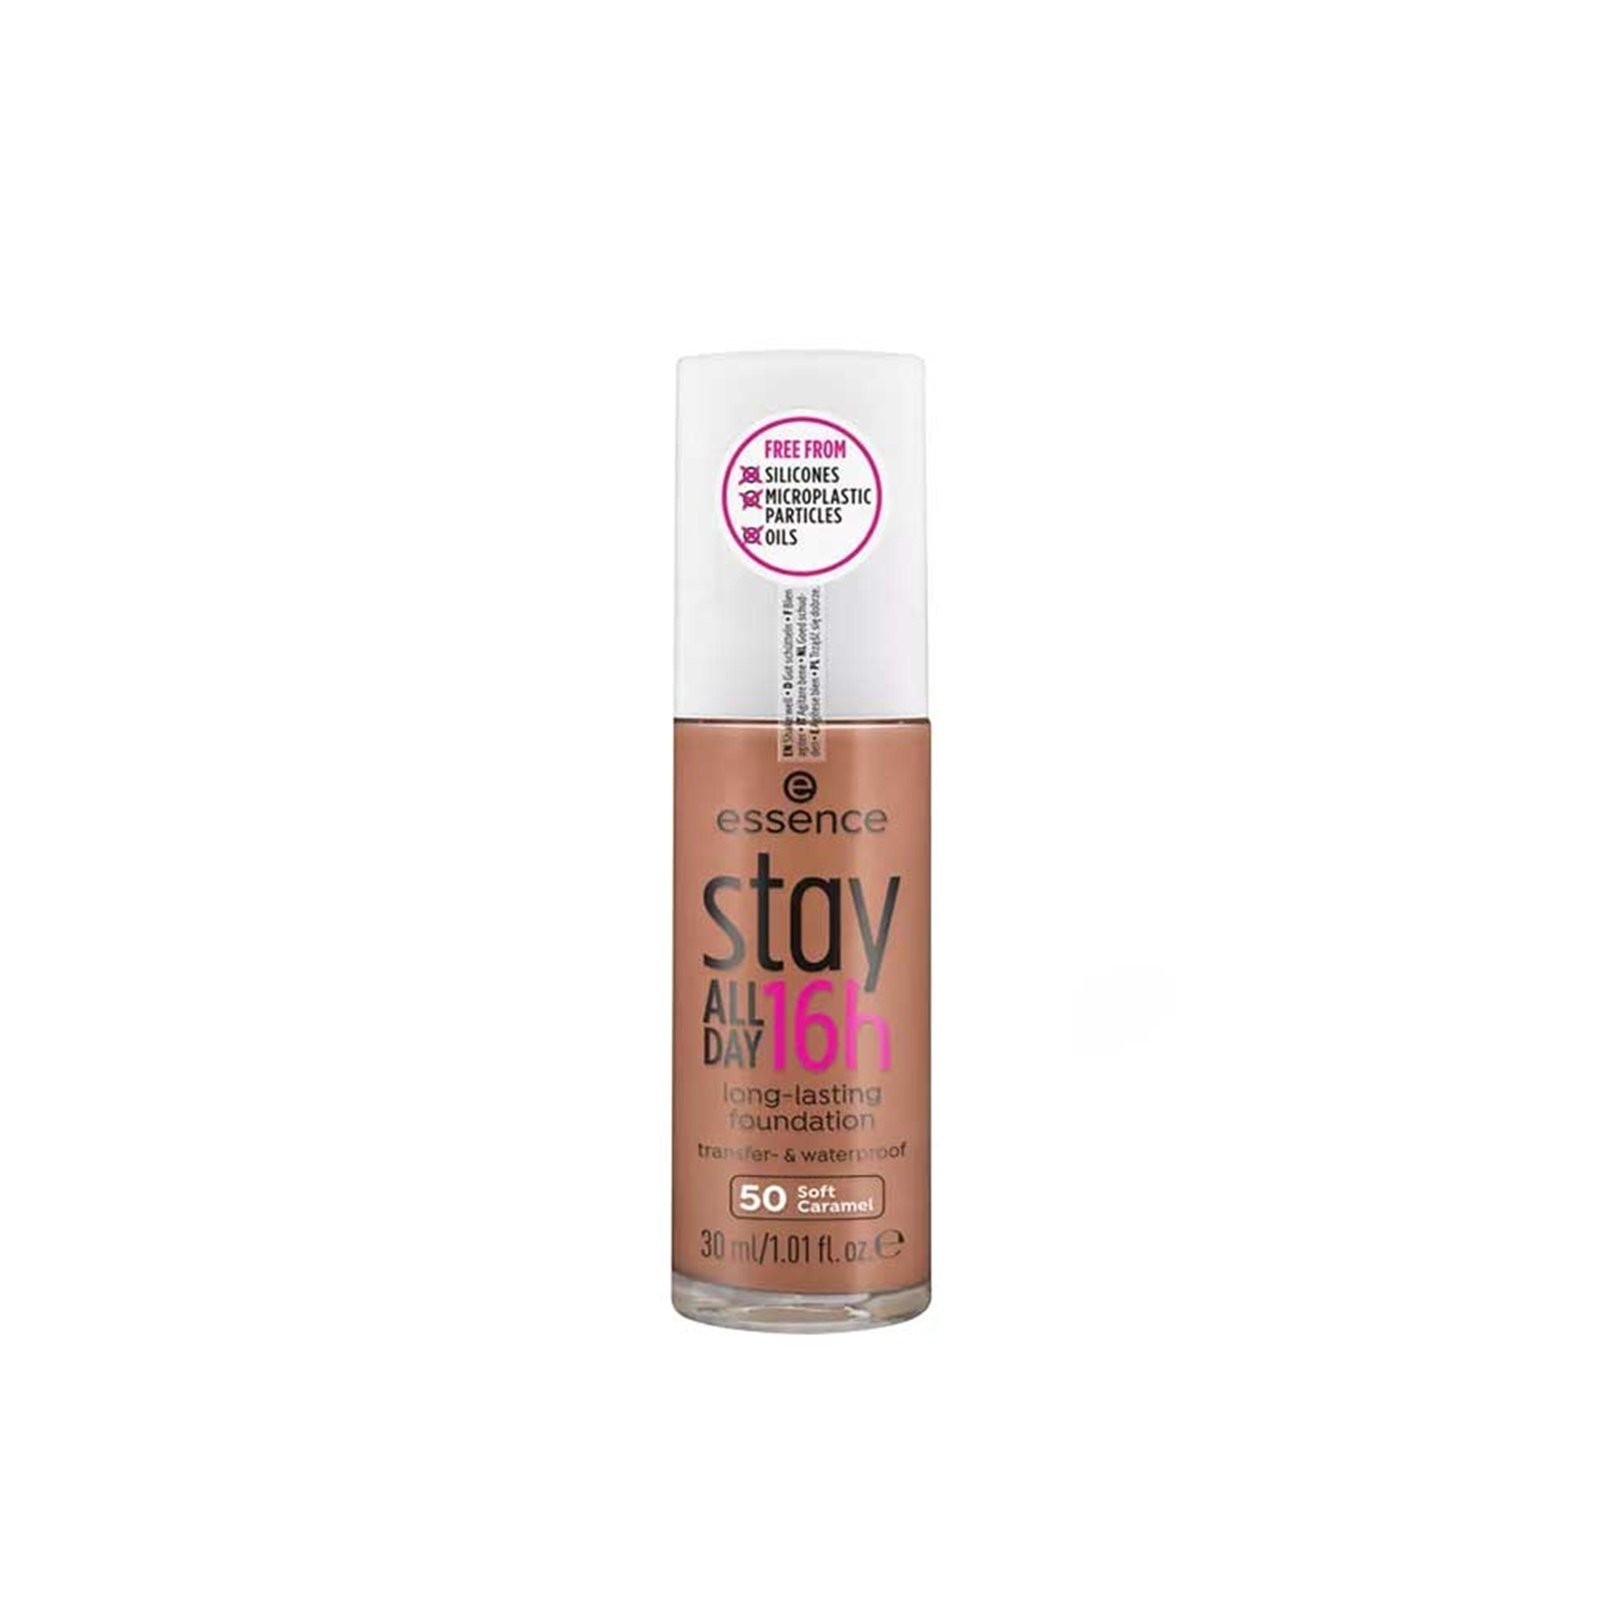 Stay All essence Buy USA Day Foundation 16h · Long-Lasting